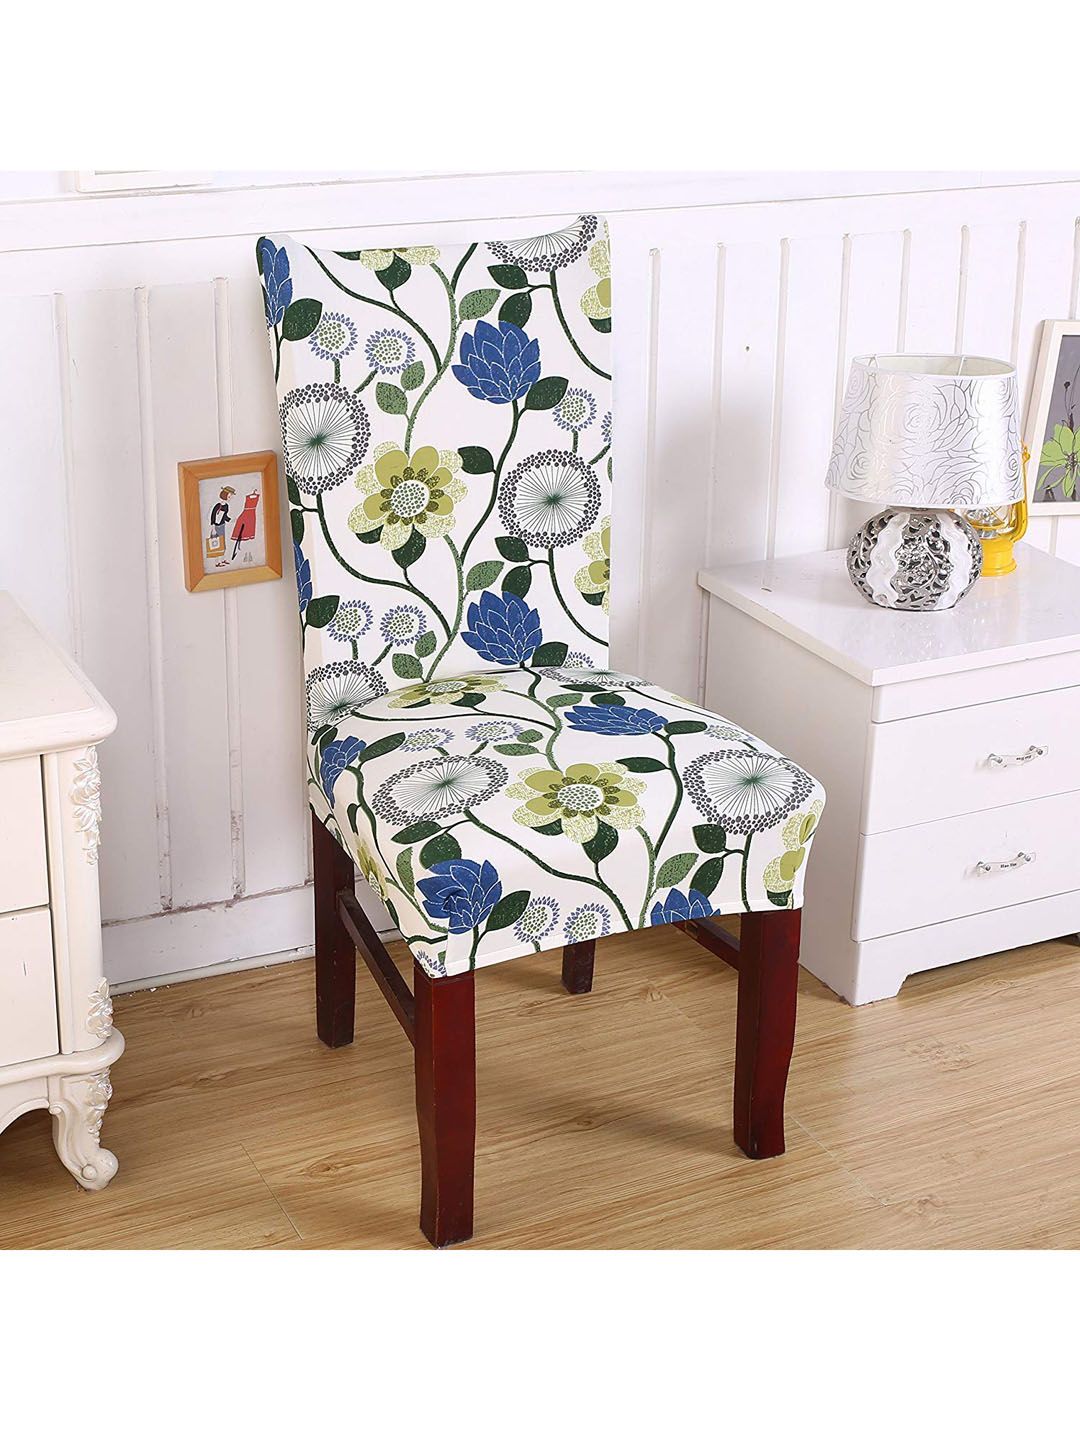 Styleys White & Green Floral Printed Chair Cover Price in India